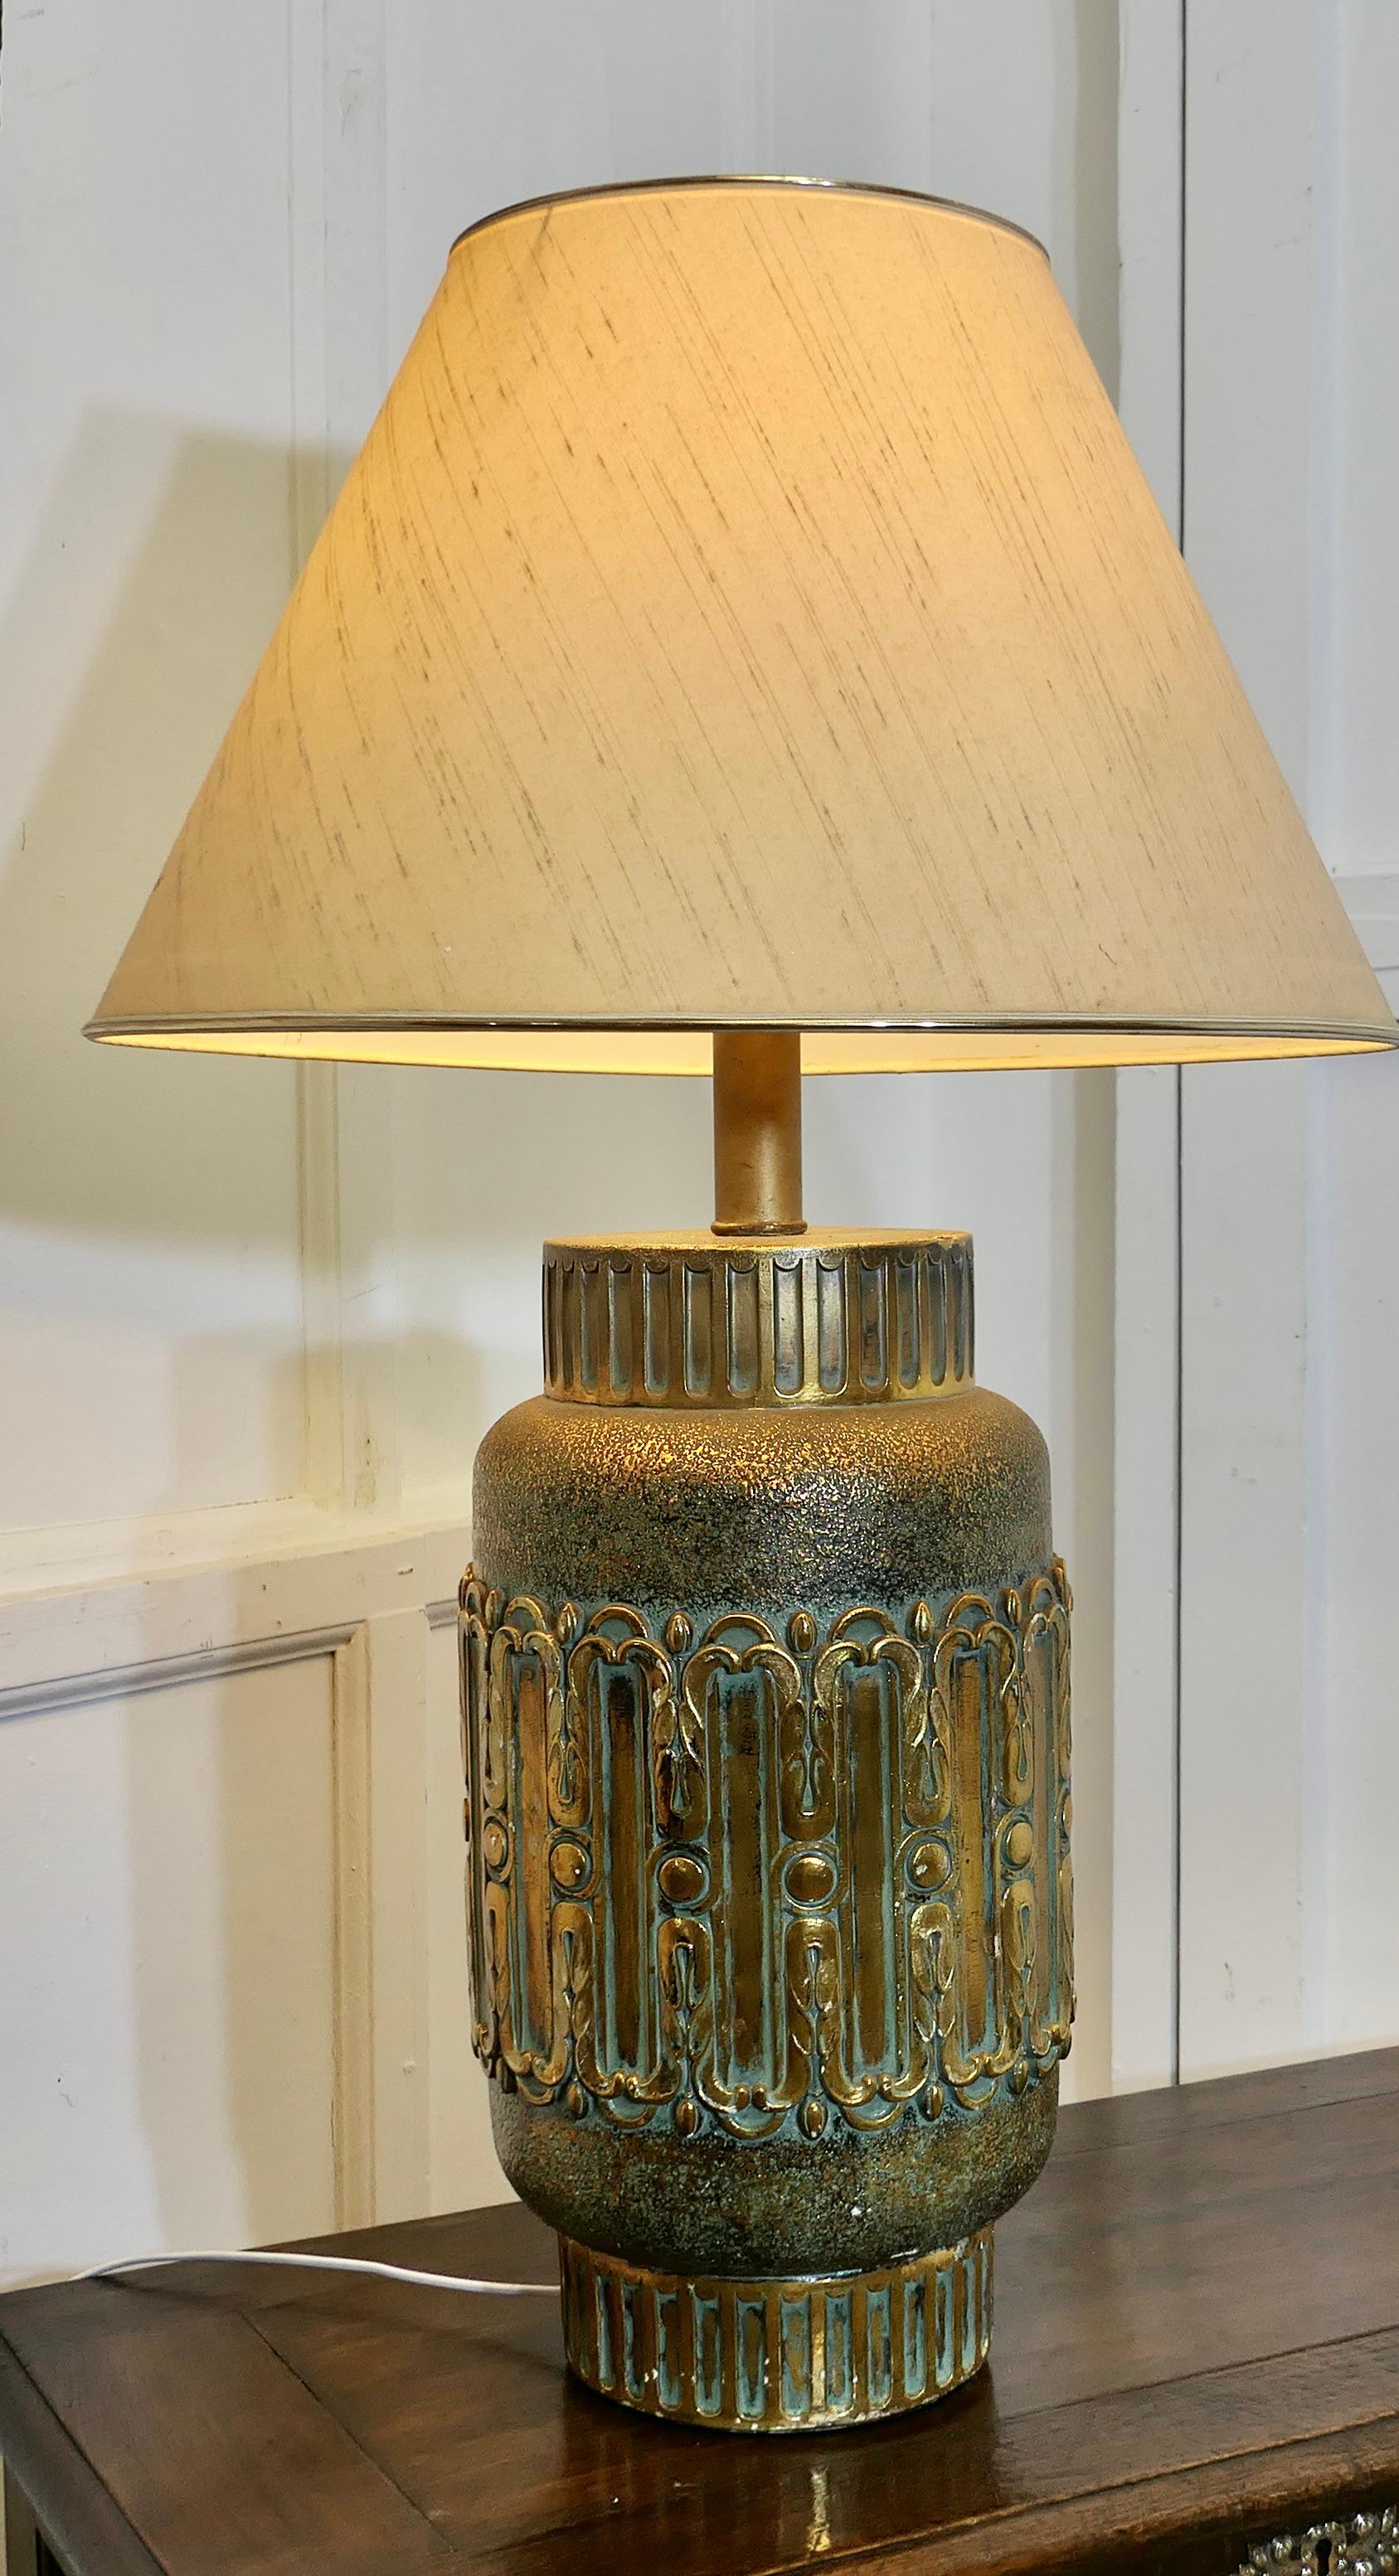 Large Bulbous Simulated Brass Ceramic Vase Lamp

This is an unusual and heavy lamp, it has a large bulbous decorative base and comes with it’s own linen look shade 
The lamp is fully wired and in good condition, a statement piece in any room
The